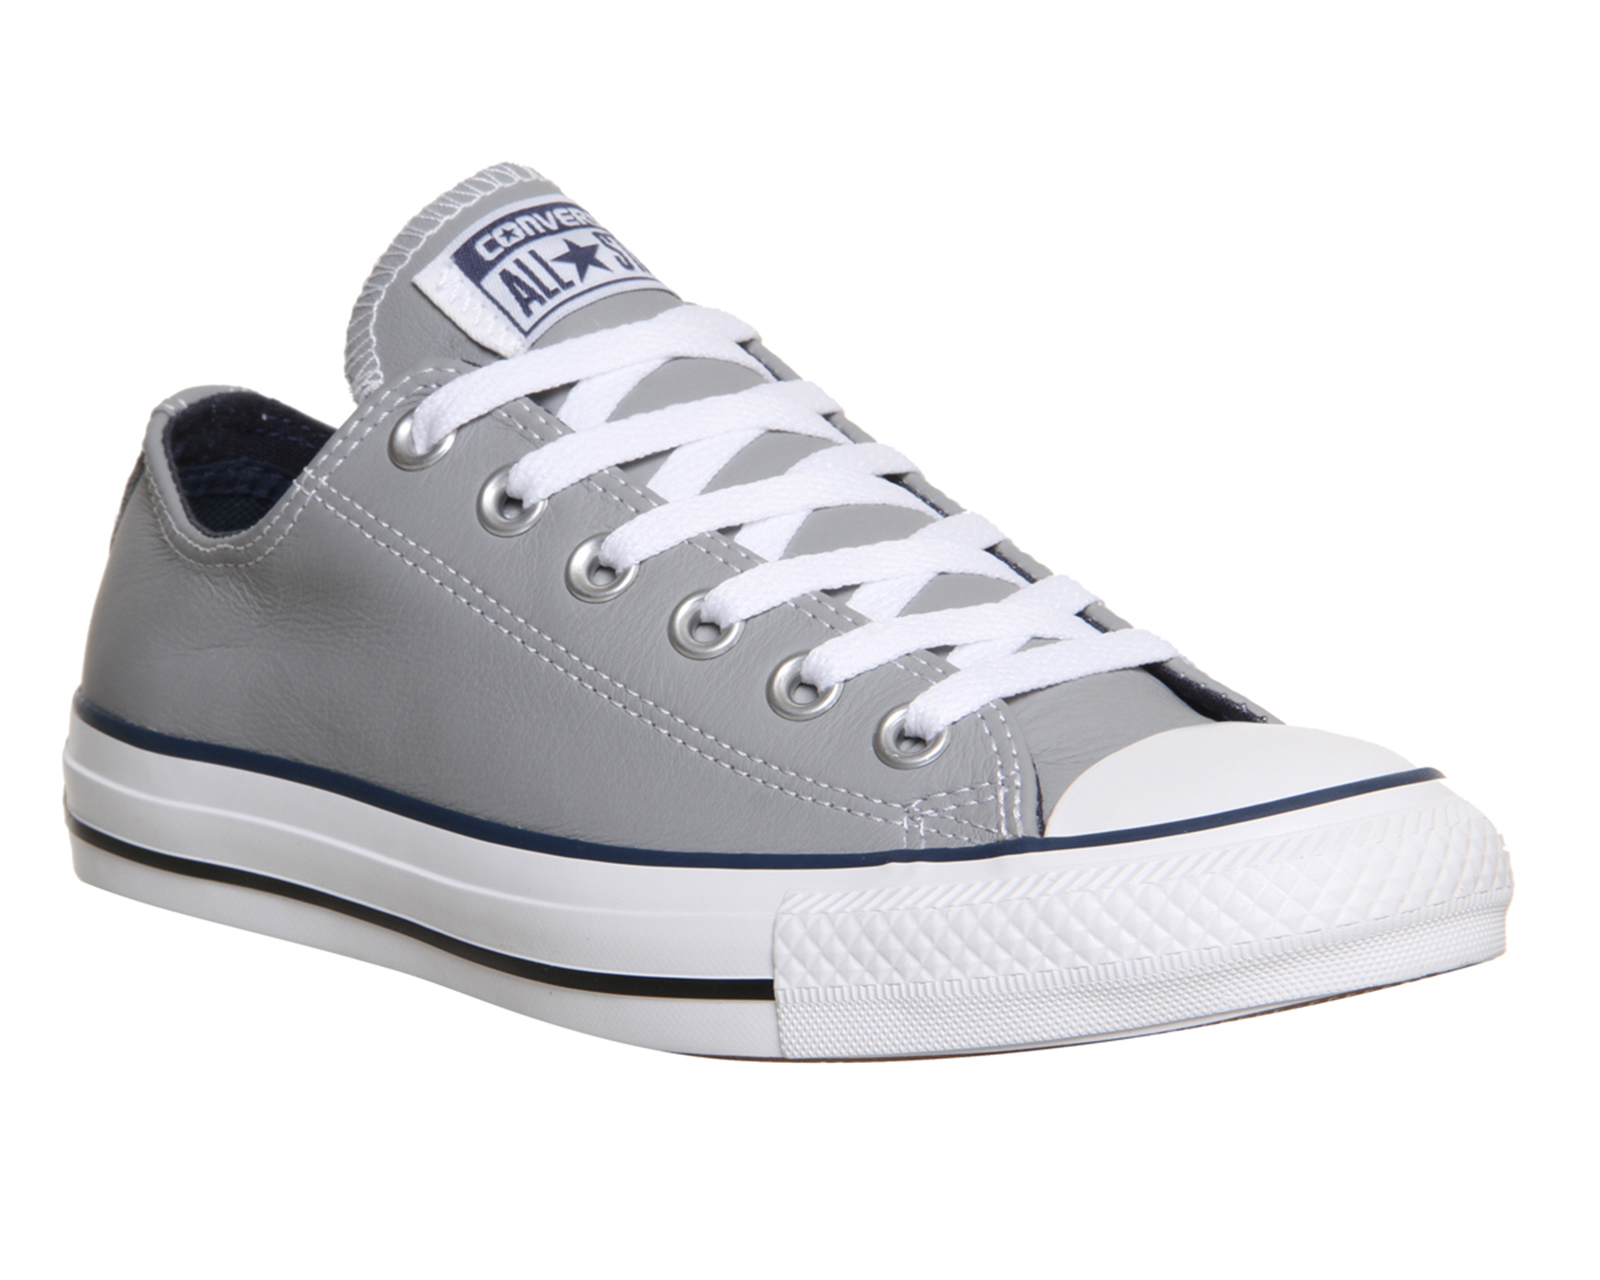 navy leather converse mens